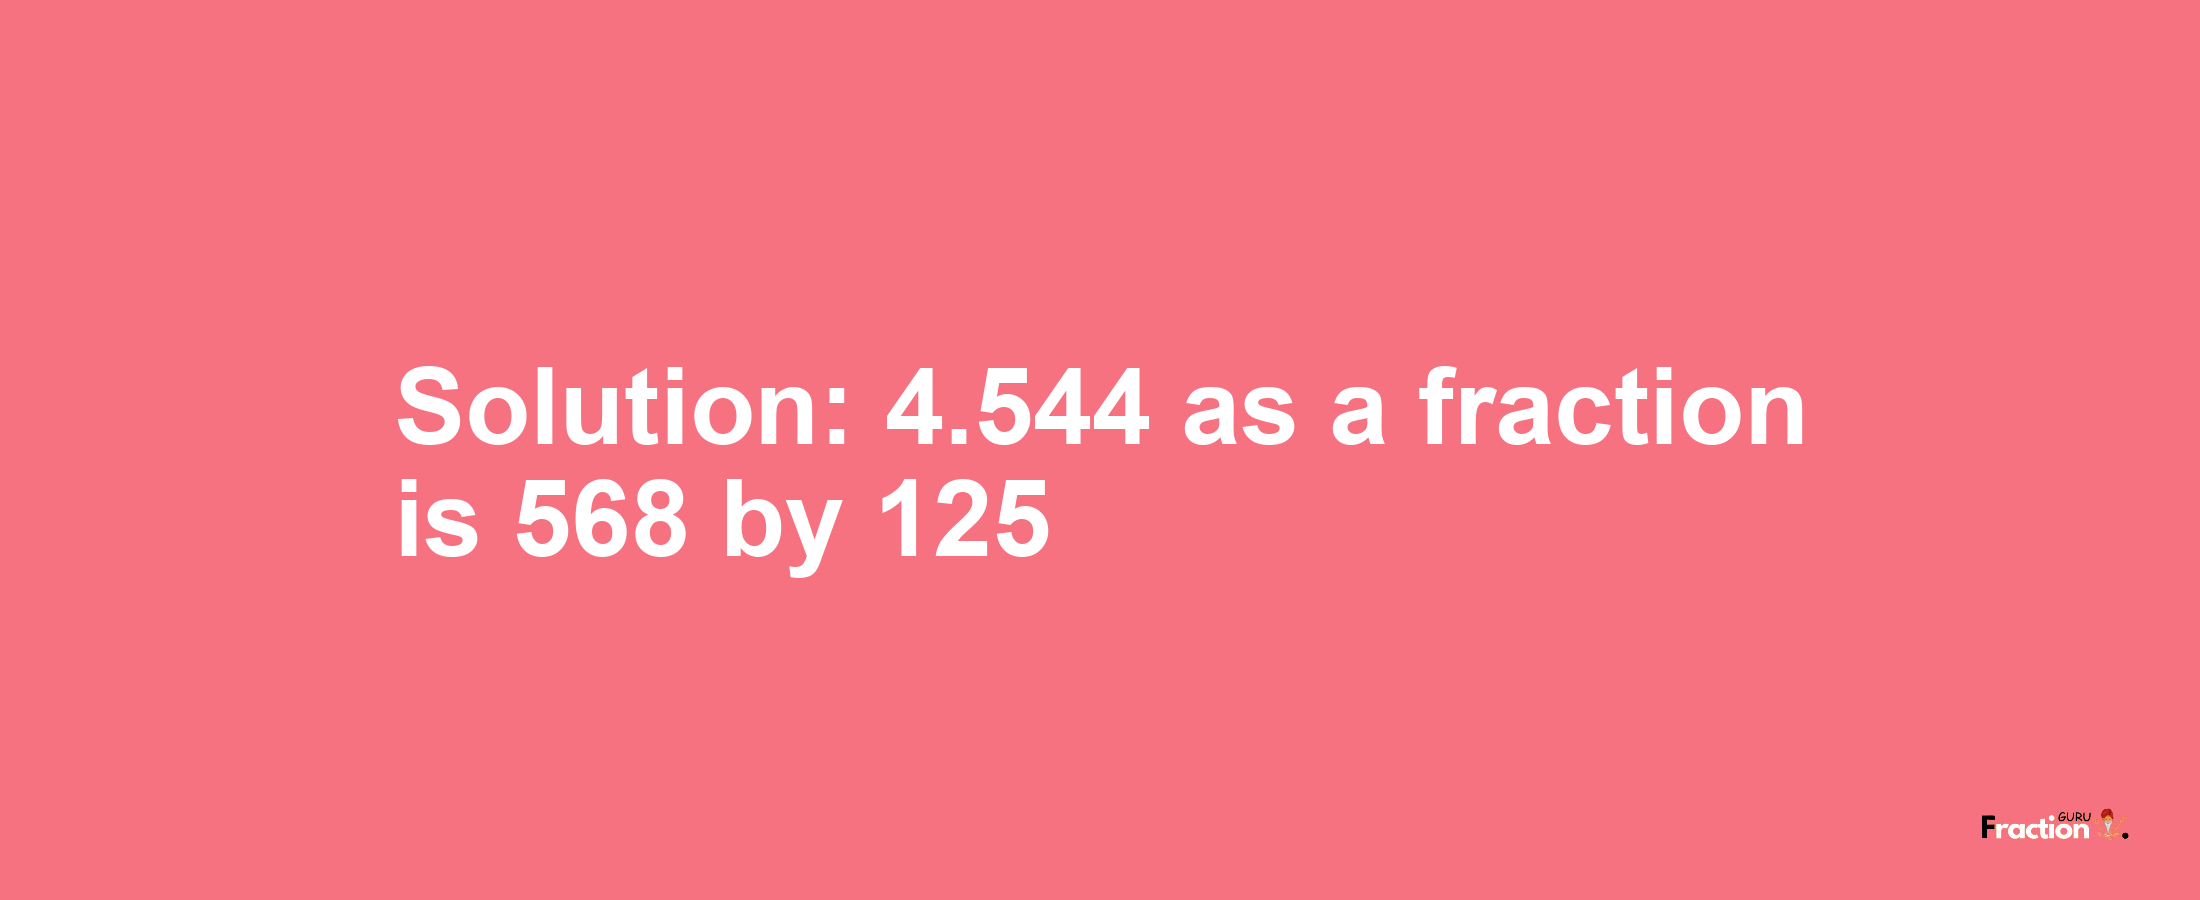 Solution:4.544 as a fraction is 568/125